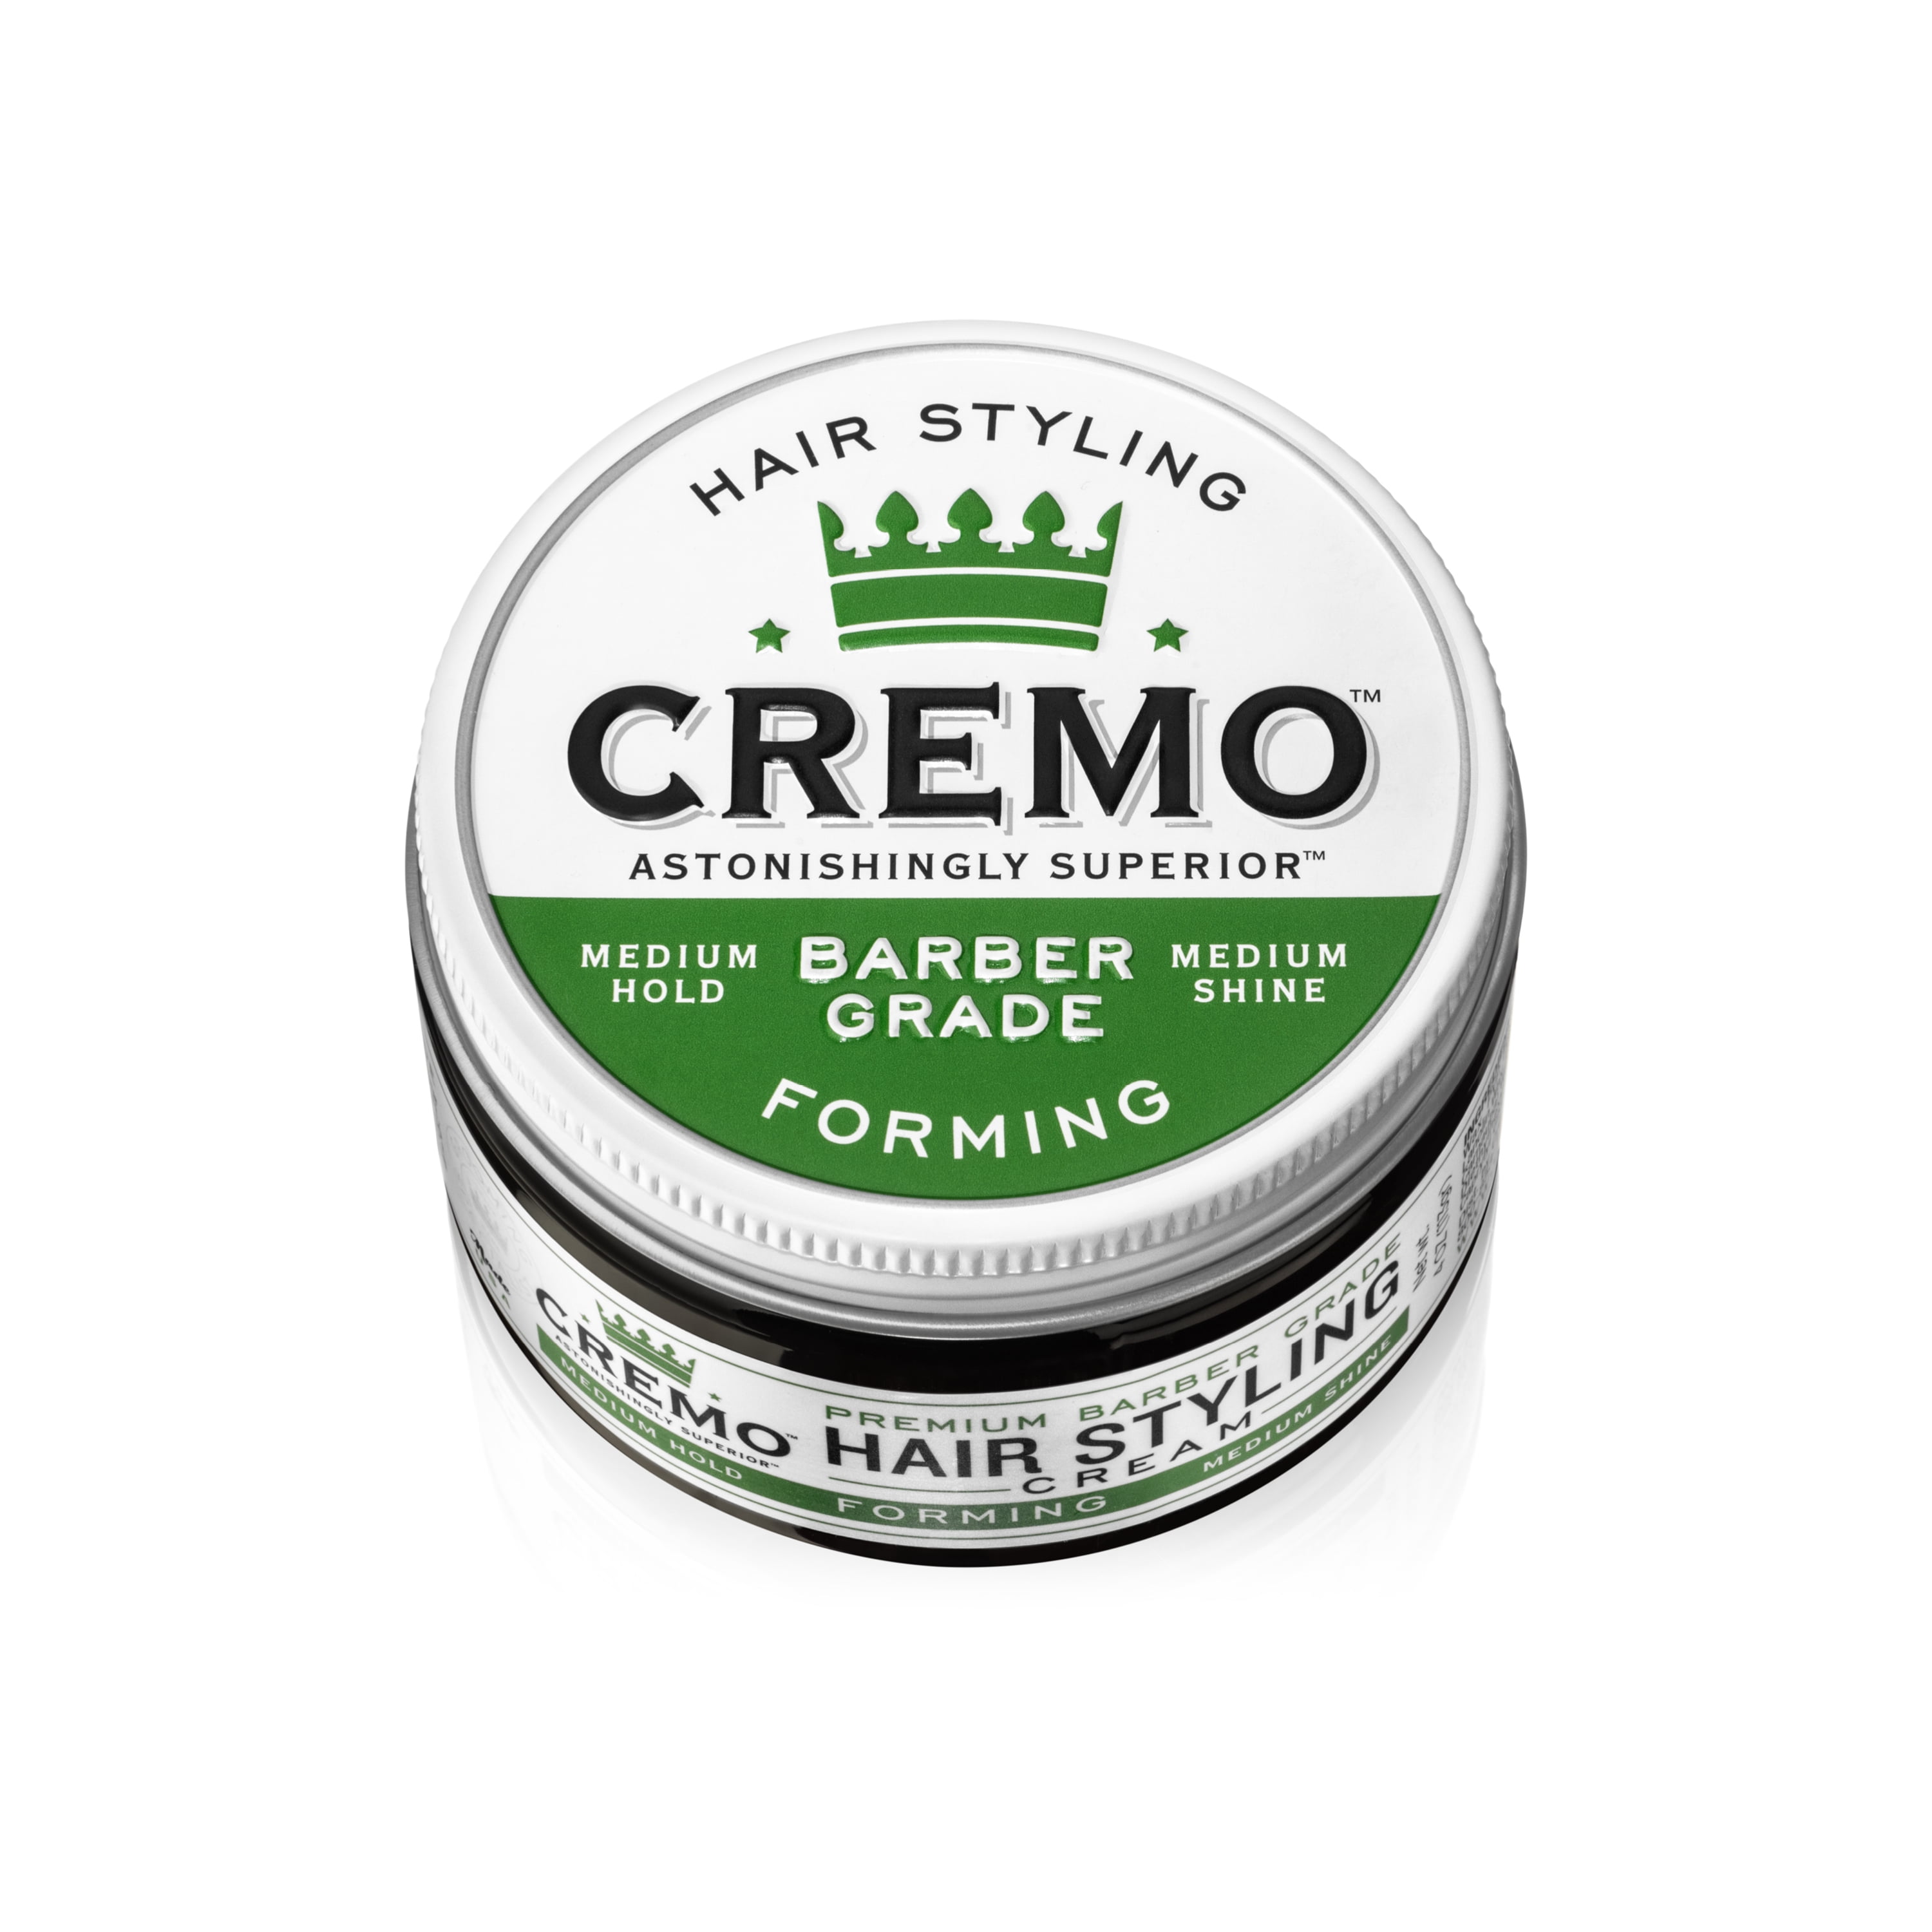 Cremo Barber Grade Hair Styling Cream, Forming, 4oz 